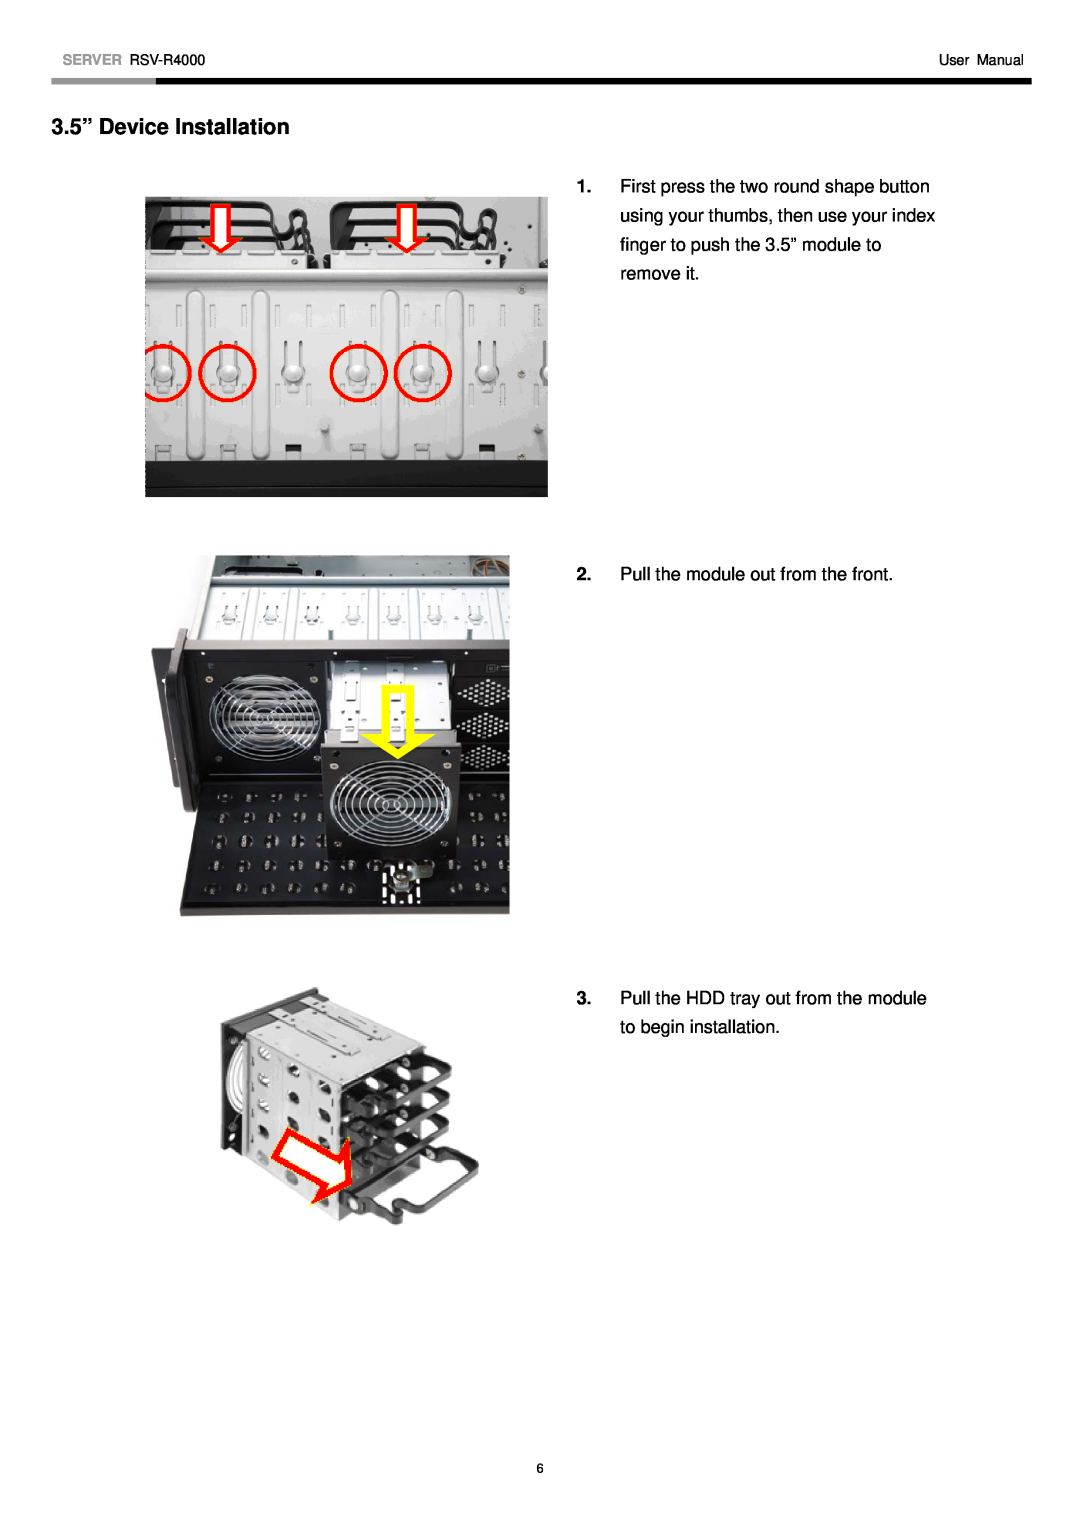 Rosewill user manual 3.5” Device Installation, Pull the module out from the front, SERVER RSV-R4000, User Manual 